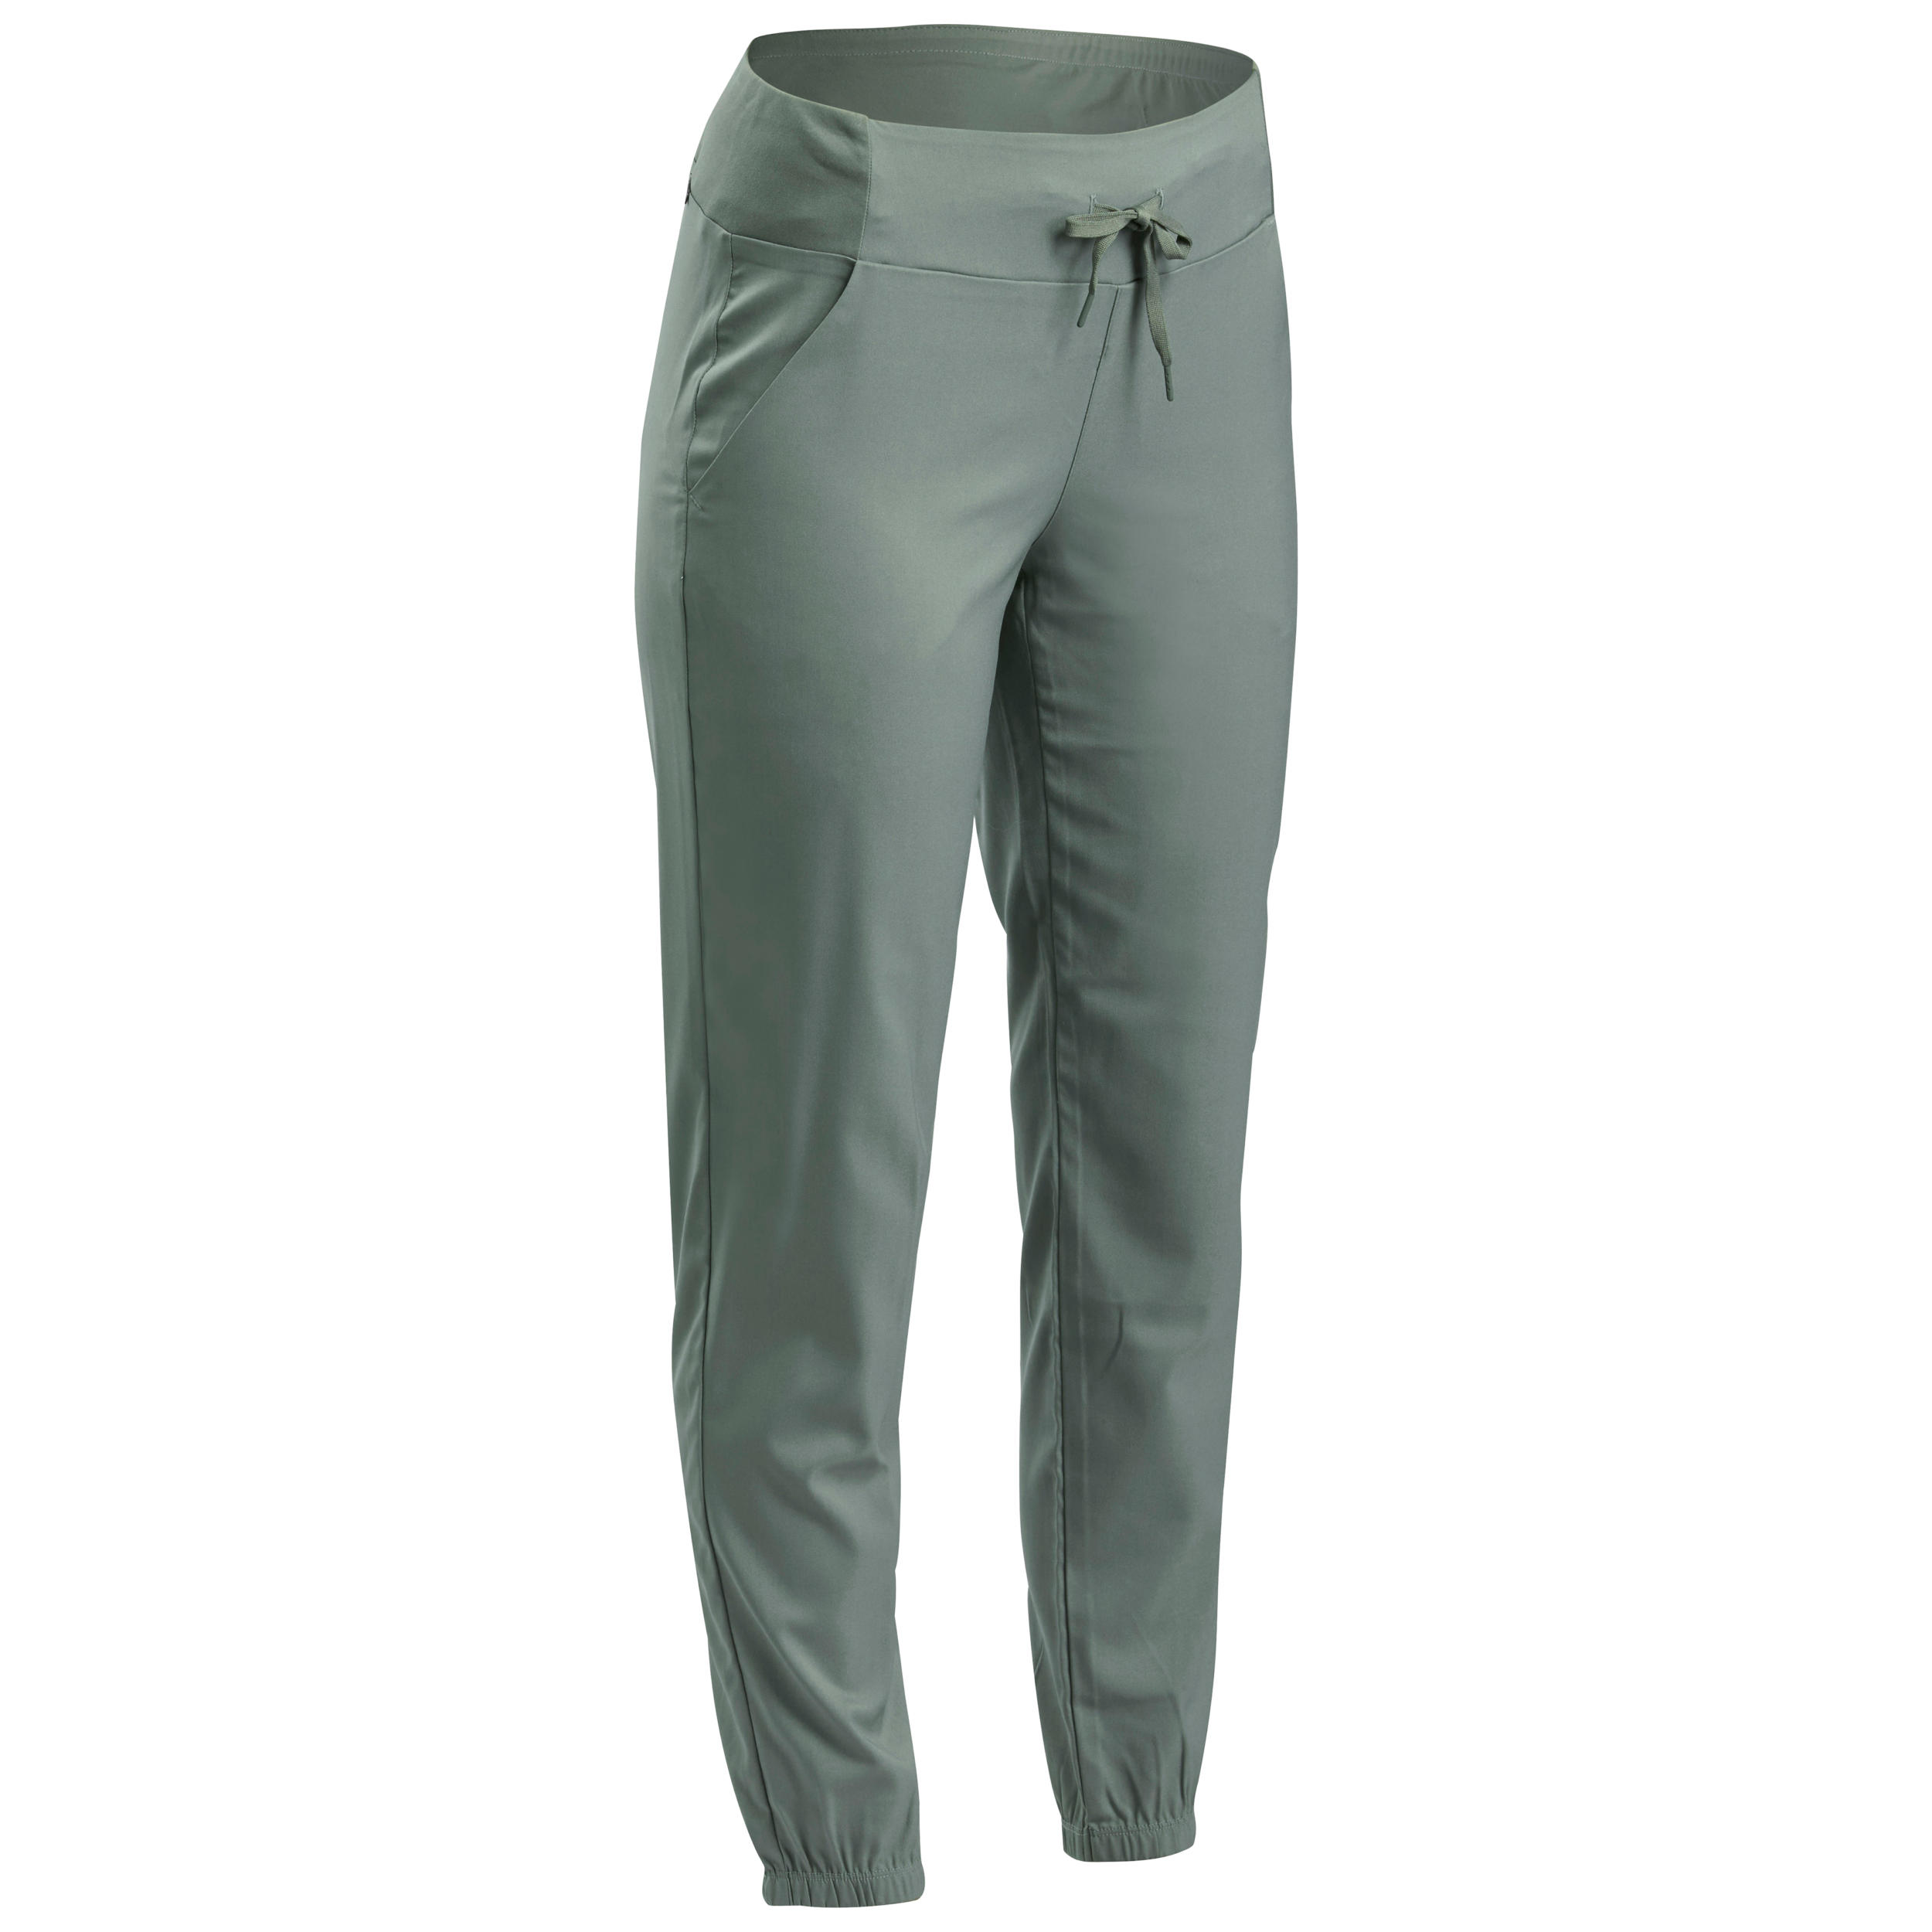 Women's skiing and snowboarding trousers 500 - Black DREAMSCAPE | Decathlon